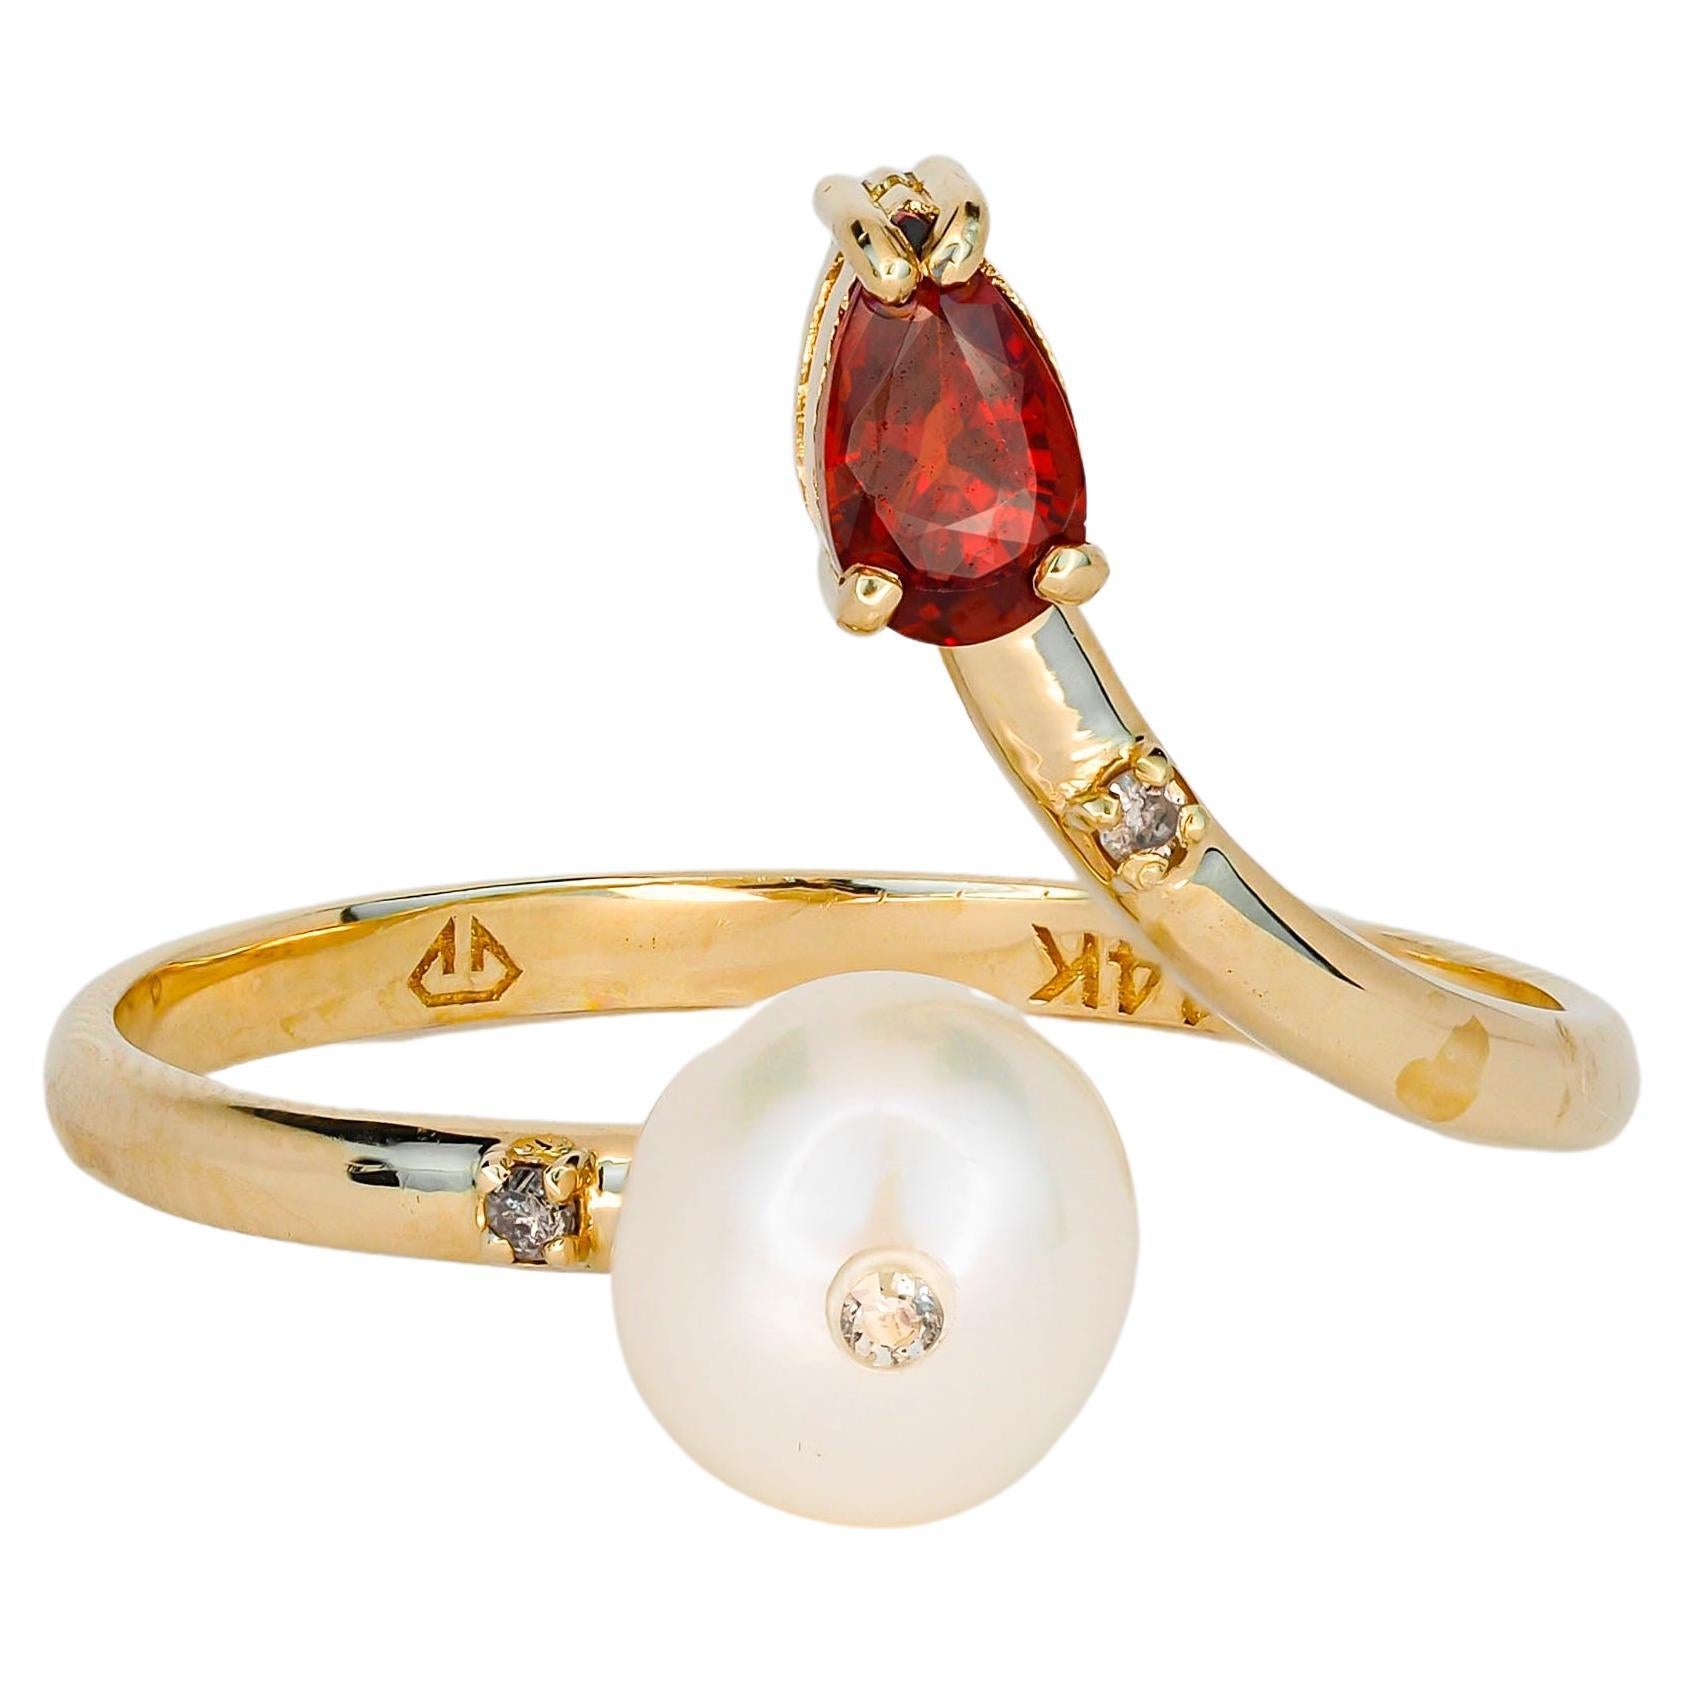 14k Gold Ring with Pearl, Garnet and Diamonds